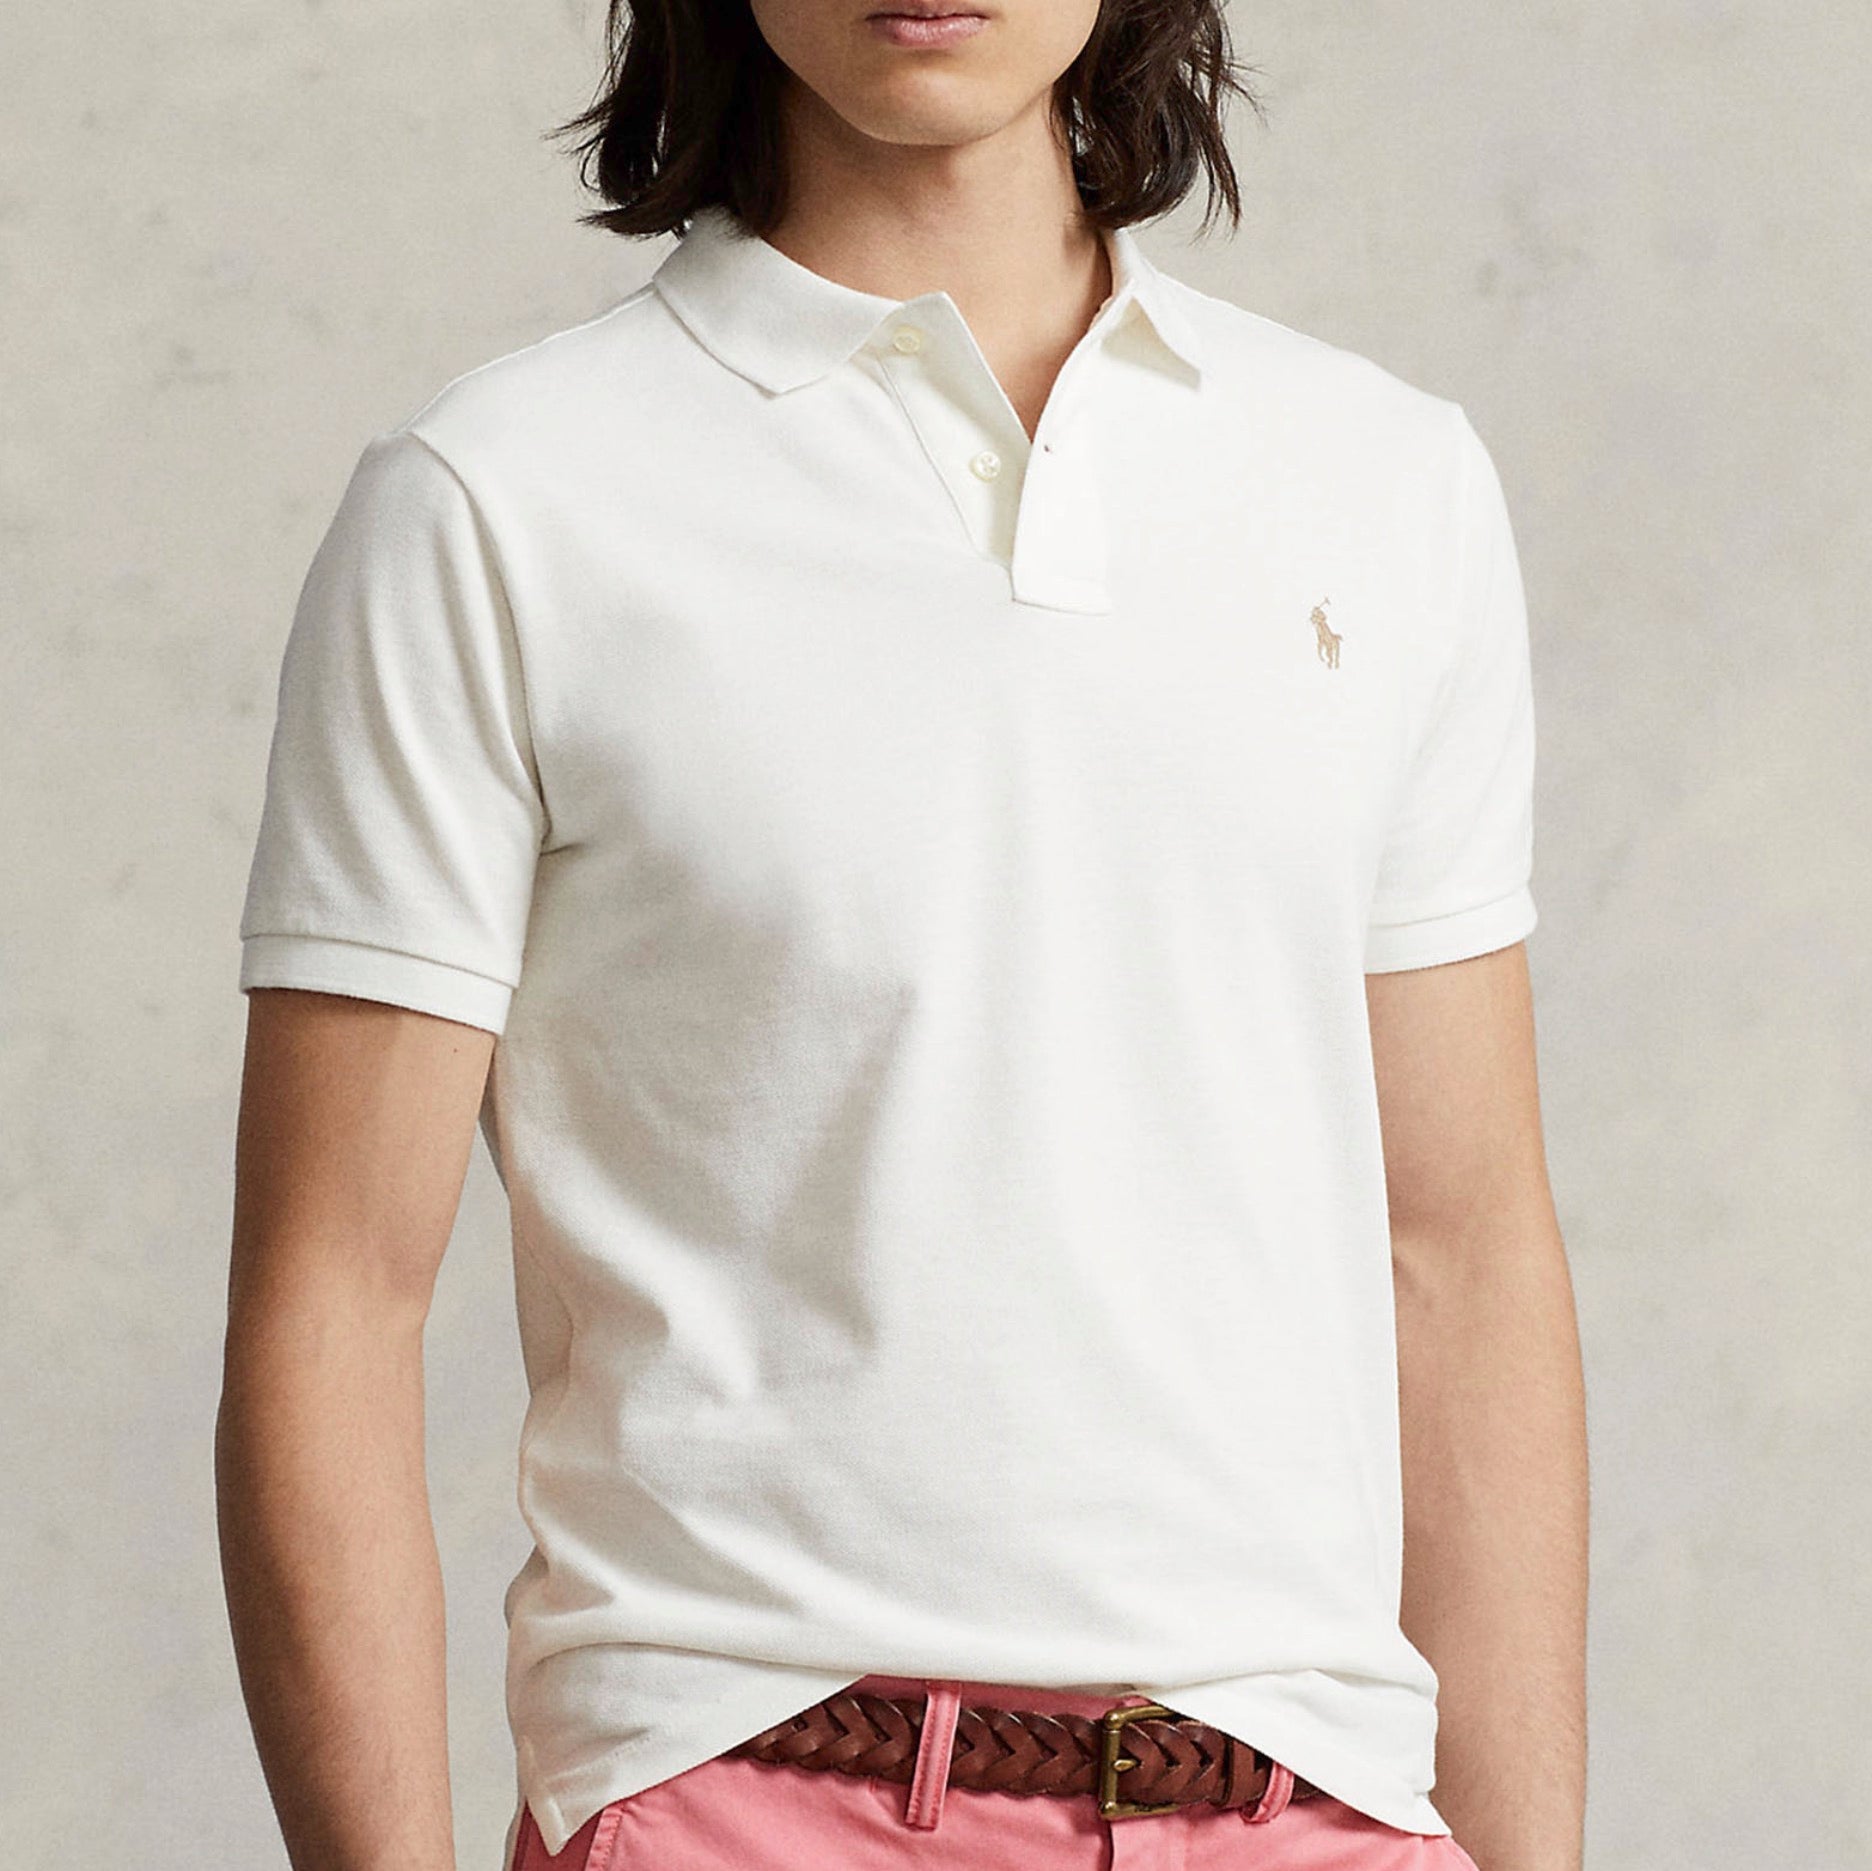 An American style standard since 1972, the Polo shirt has been imitated but never matched. Over the decades, Ralph Lauren has reimagined his signature style in a wide array of colors and fits, yet all retain the quality and attention to detail of the iconic original. 